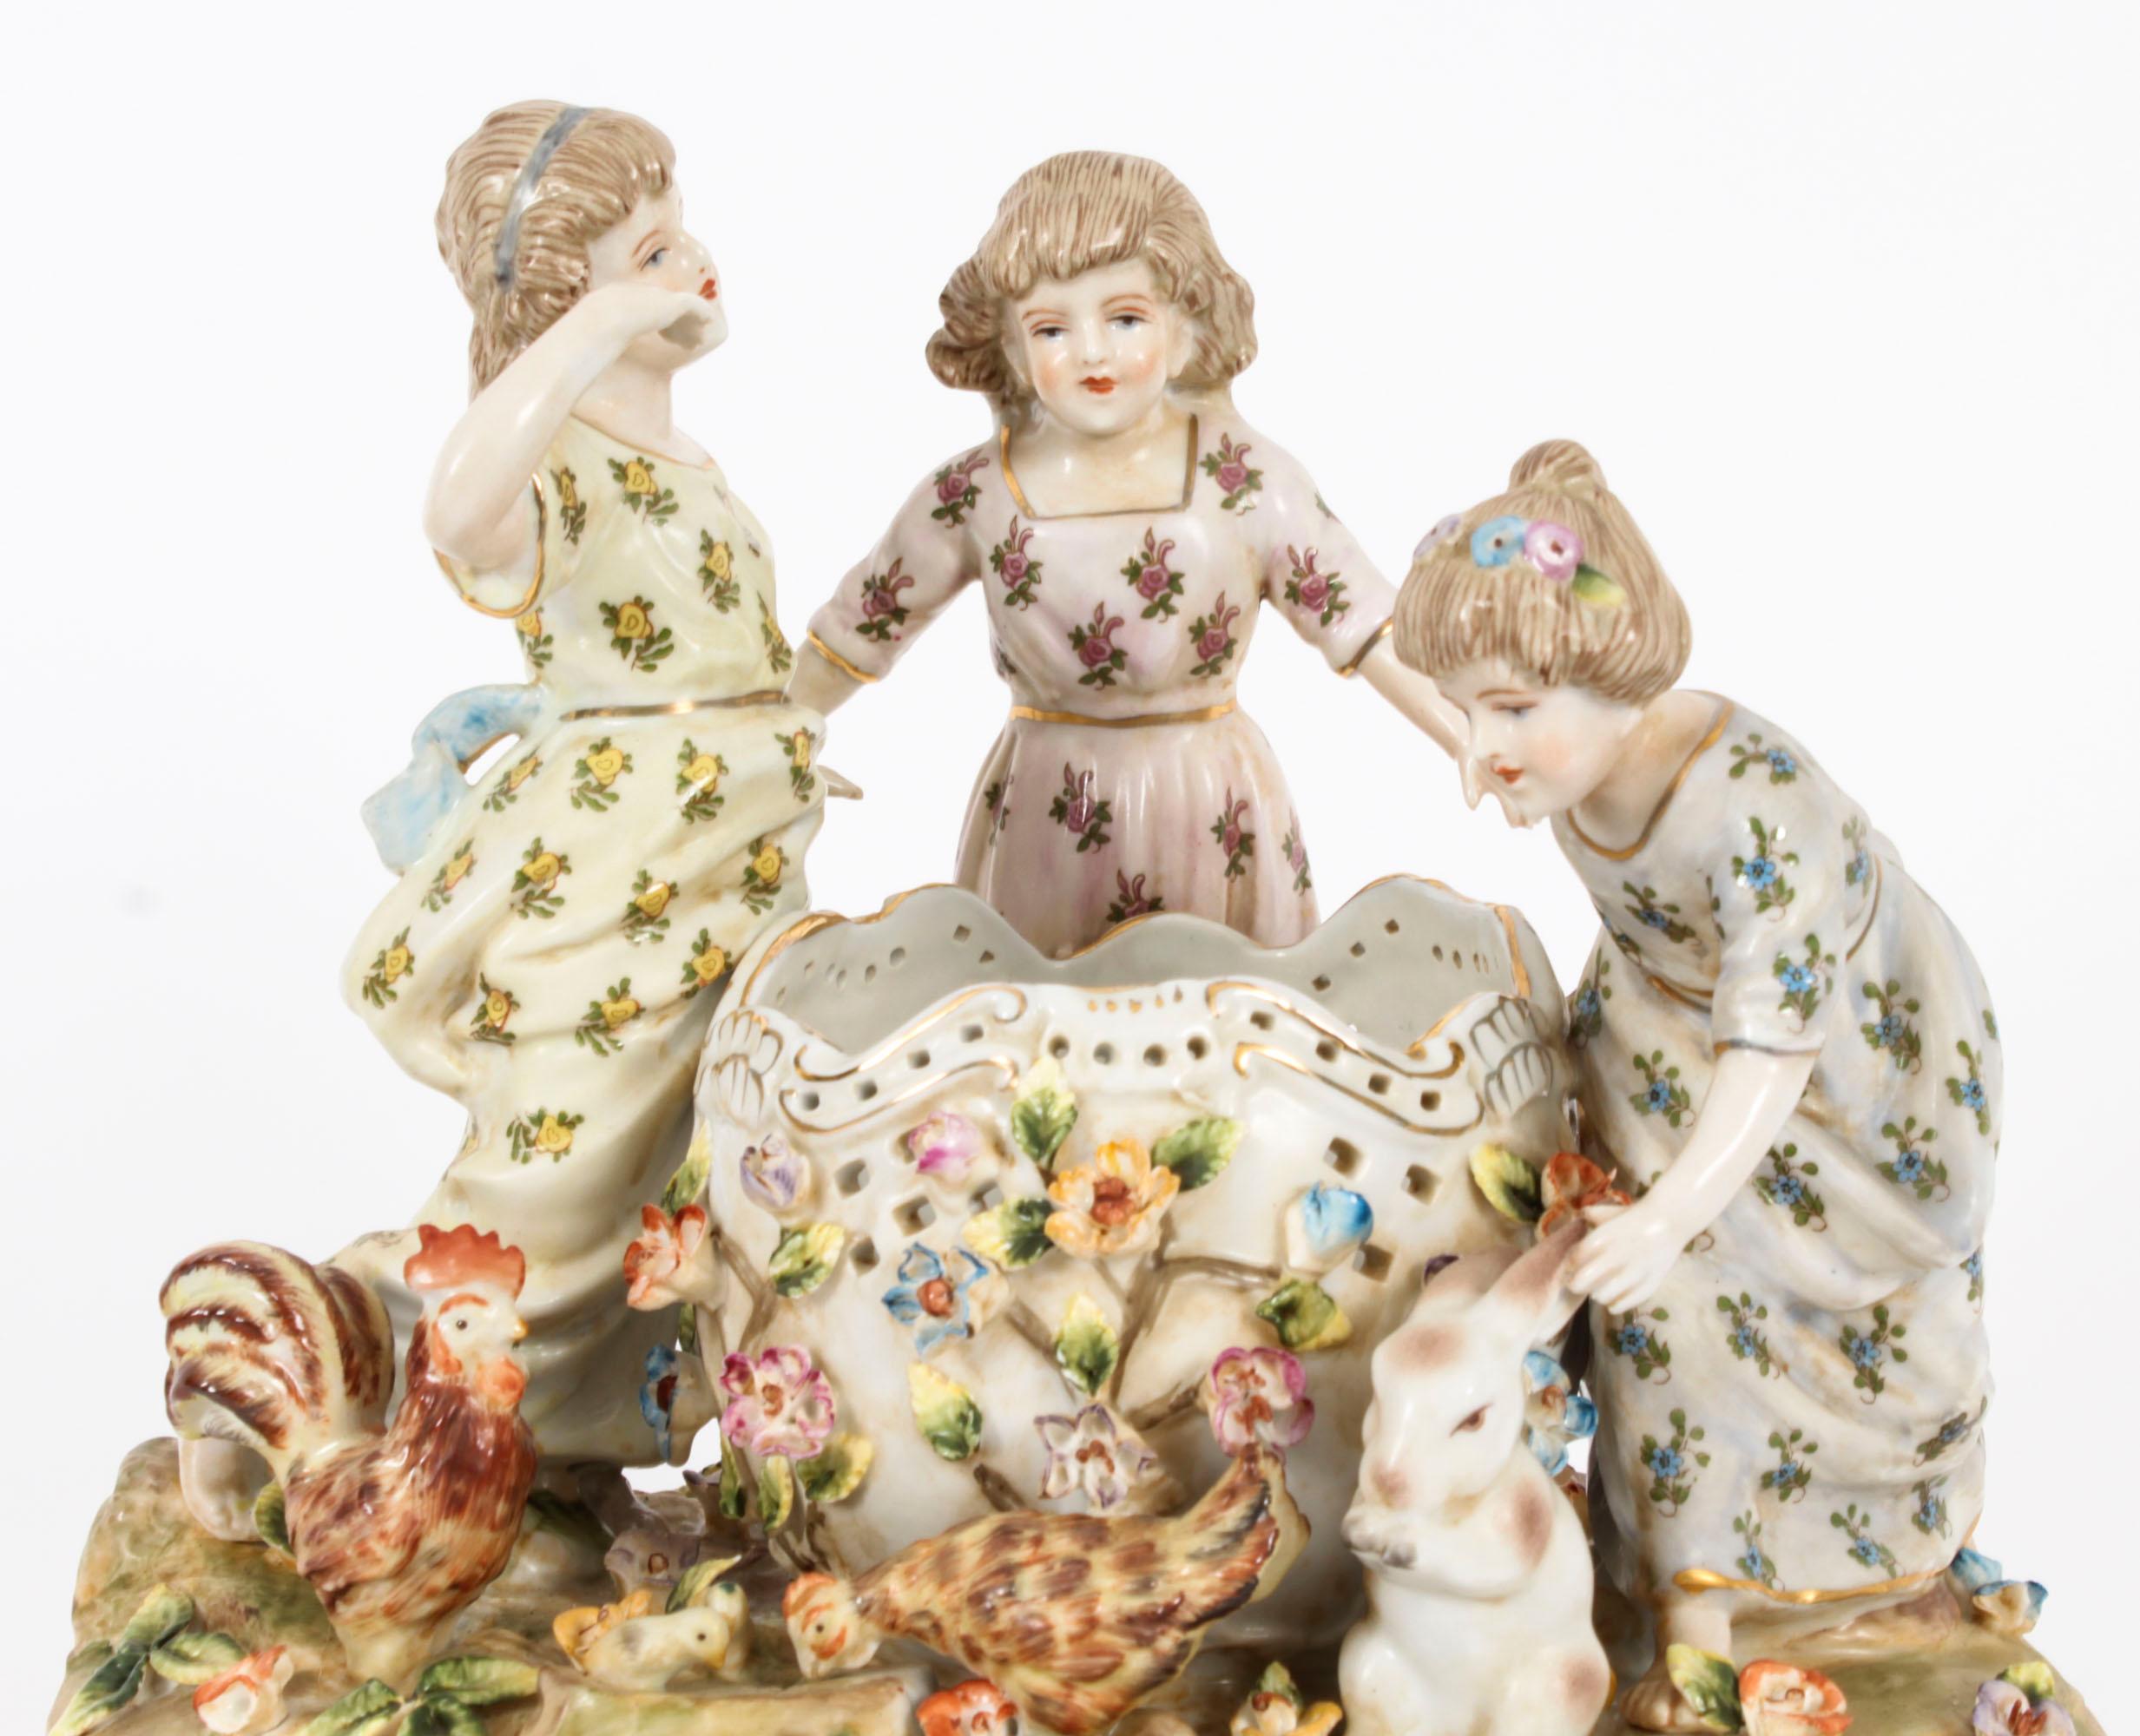 This is truly delightful Vintage classical porcelain centrepiece in the Dresden manner, dating from the last quarter of the 20th century.

This stunning centrepiece is hand-painted with an array of bright colours. It features three charming girls